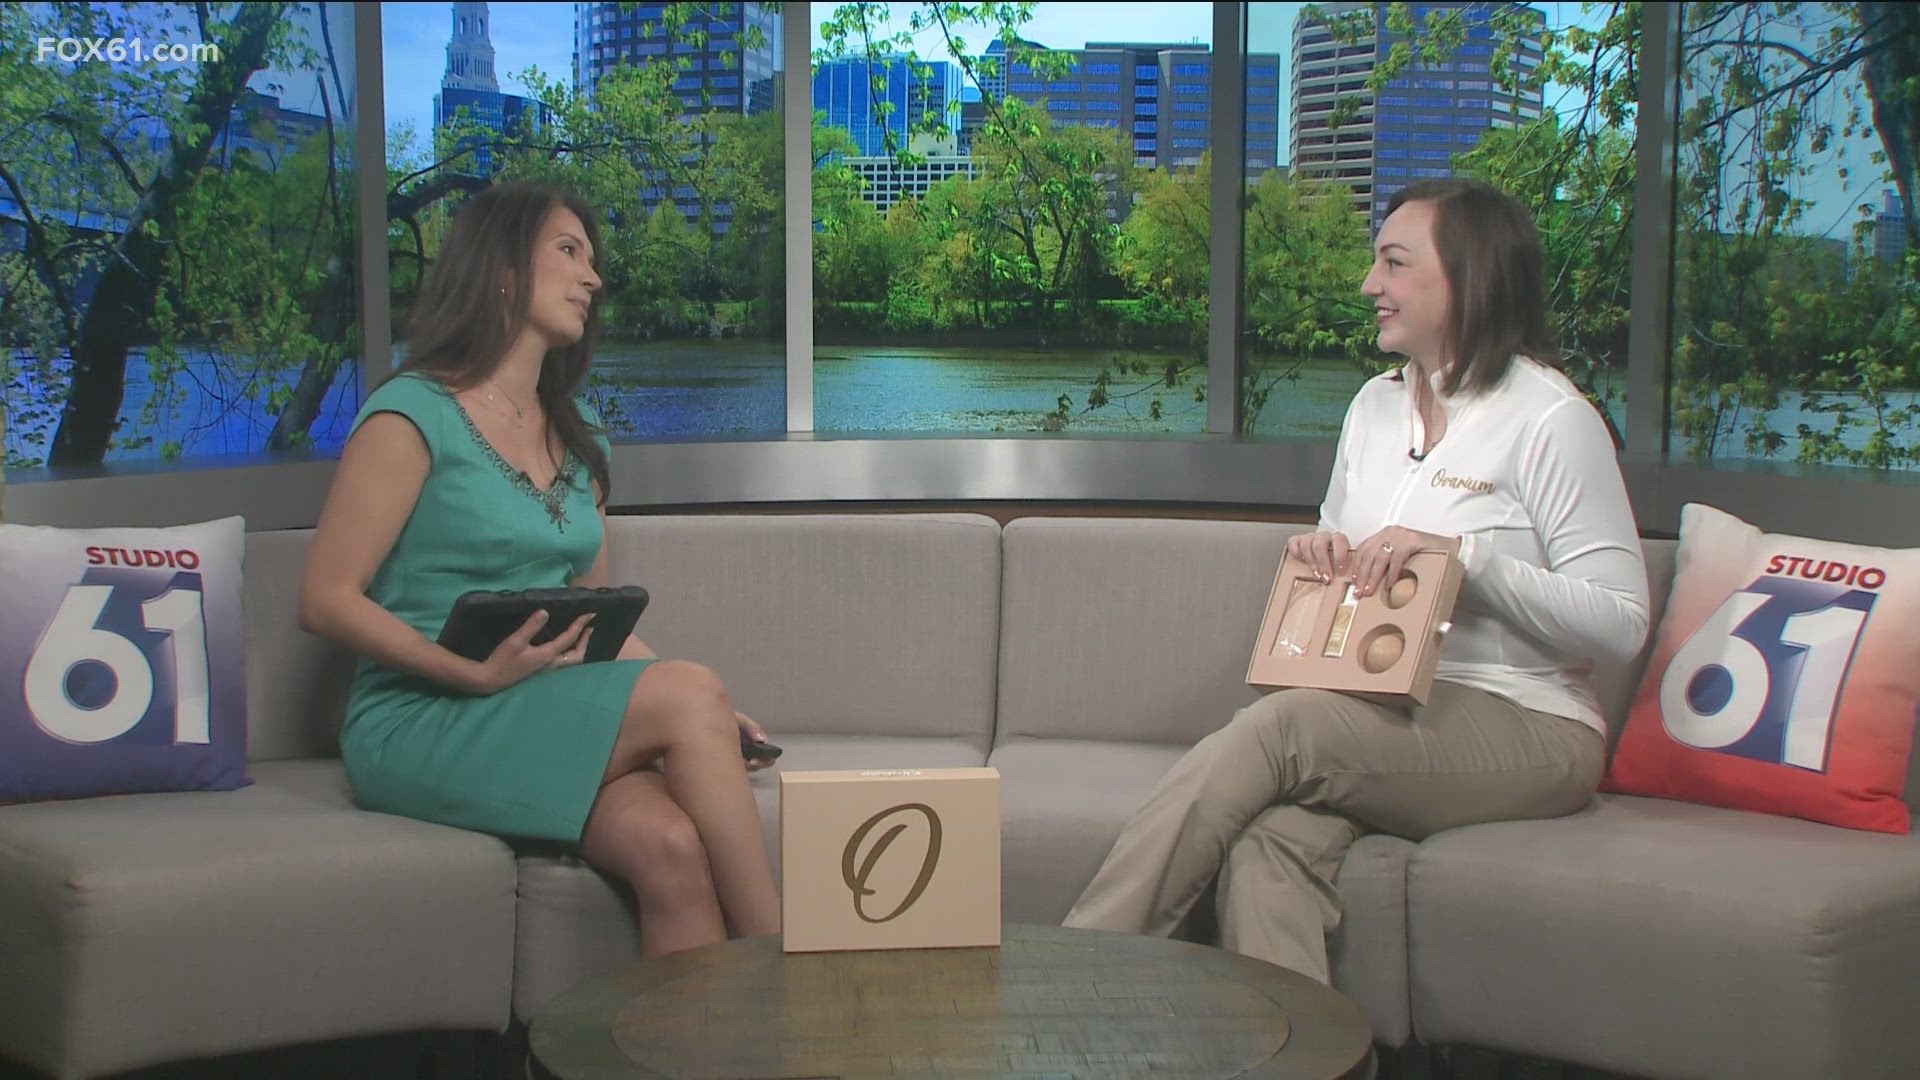 It's National Infertility Awareness Week, and Nichole Whitcomb, COO of Ovarium Conception, discusses the process and support many go through to get pregnant.